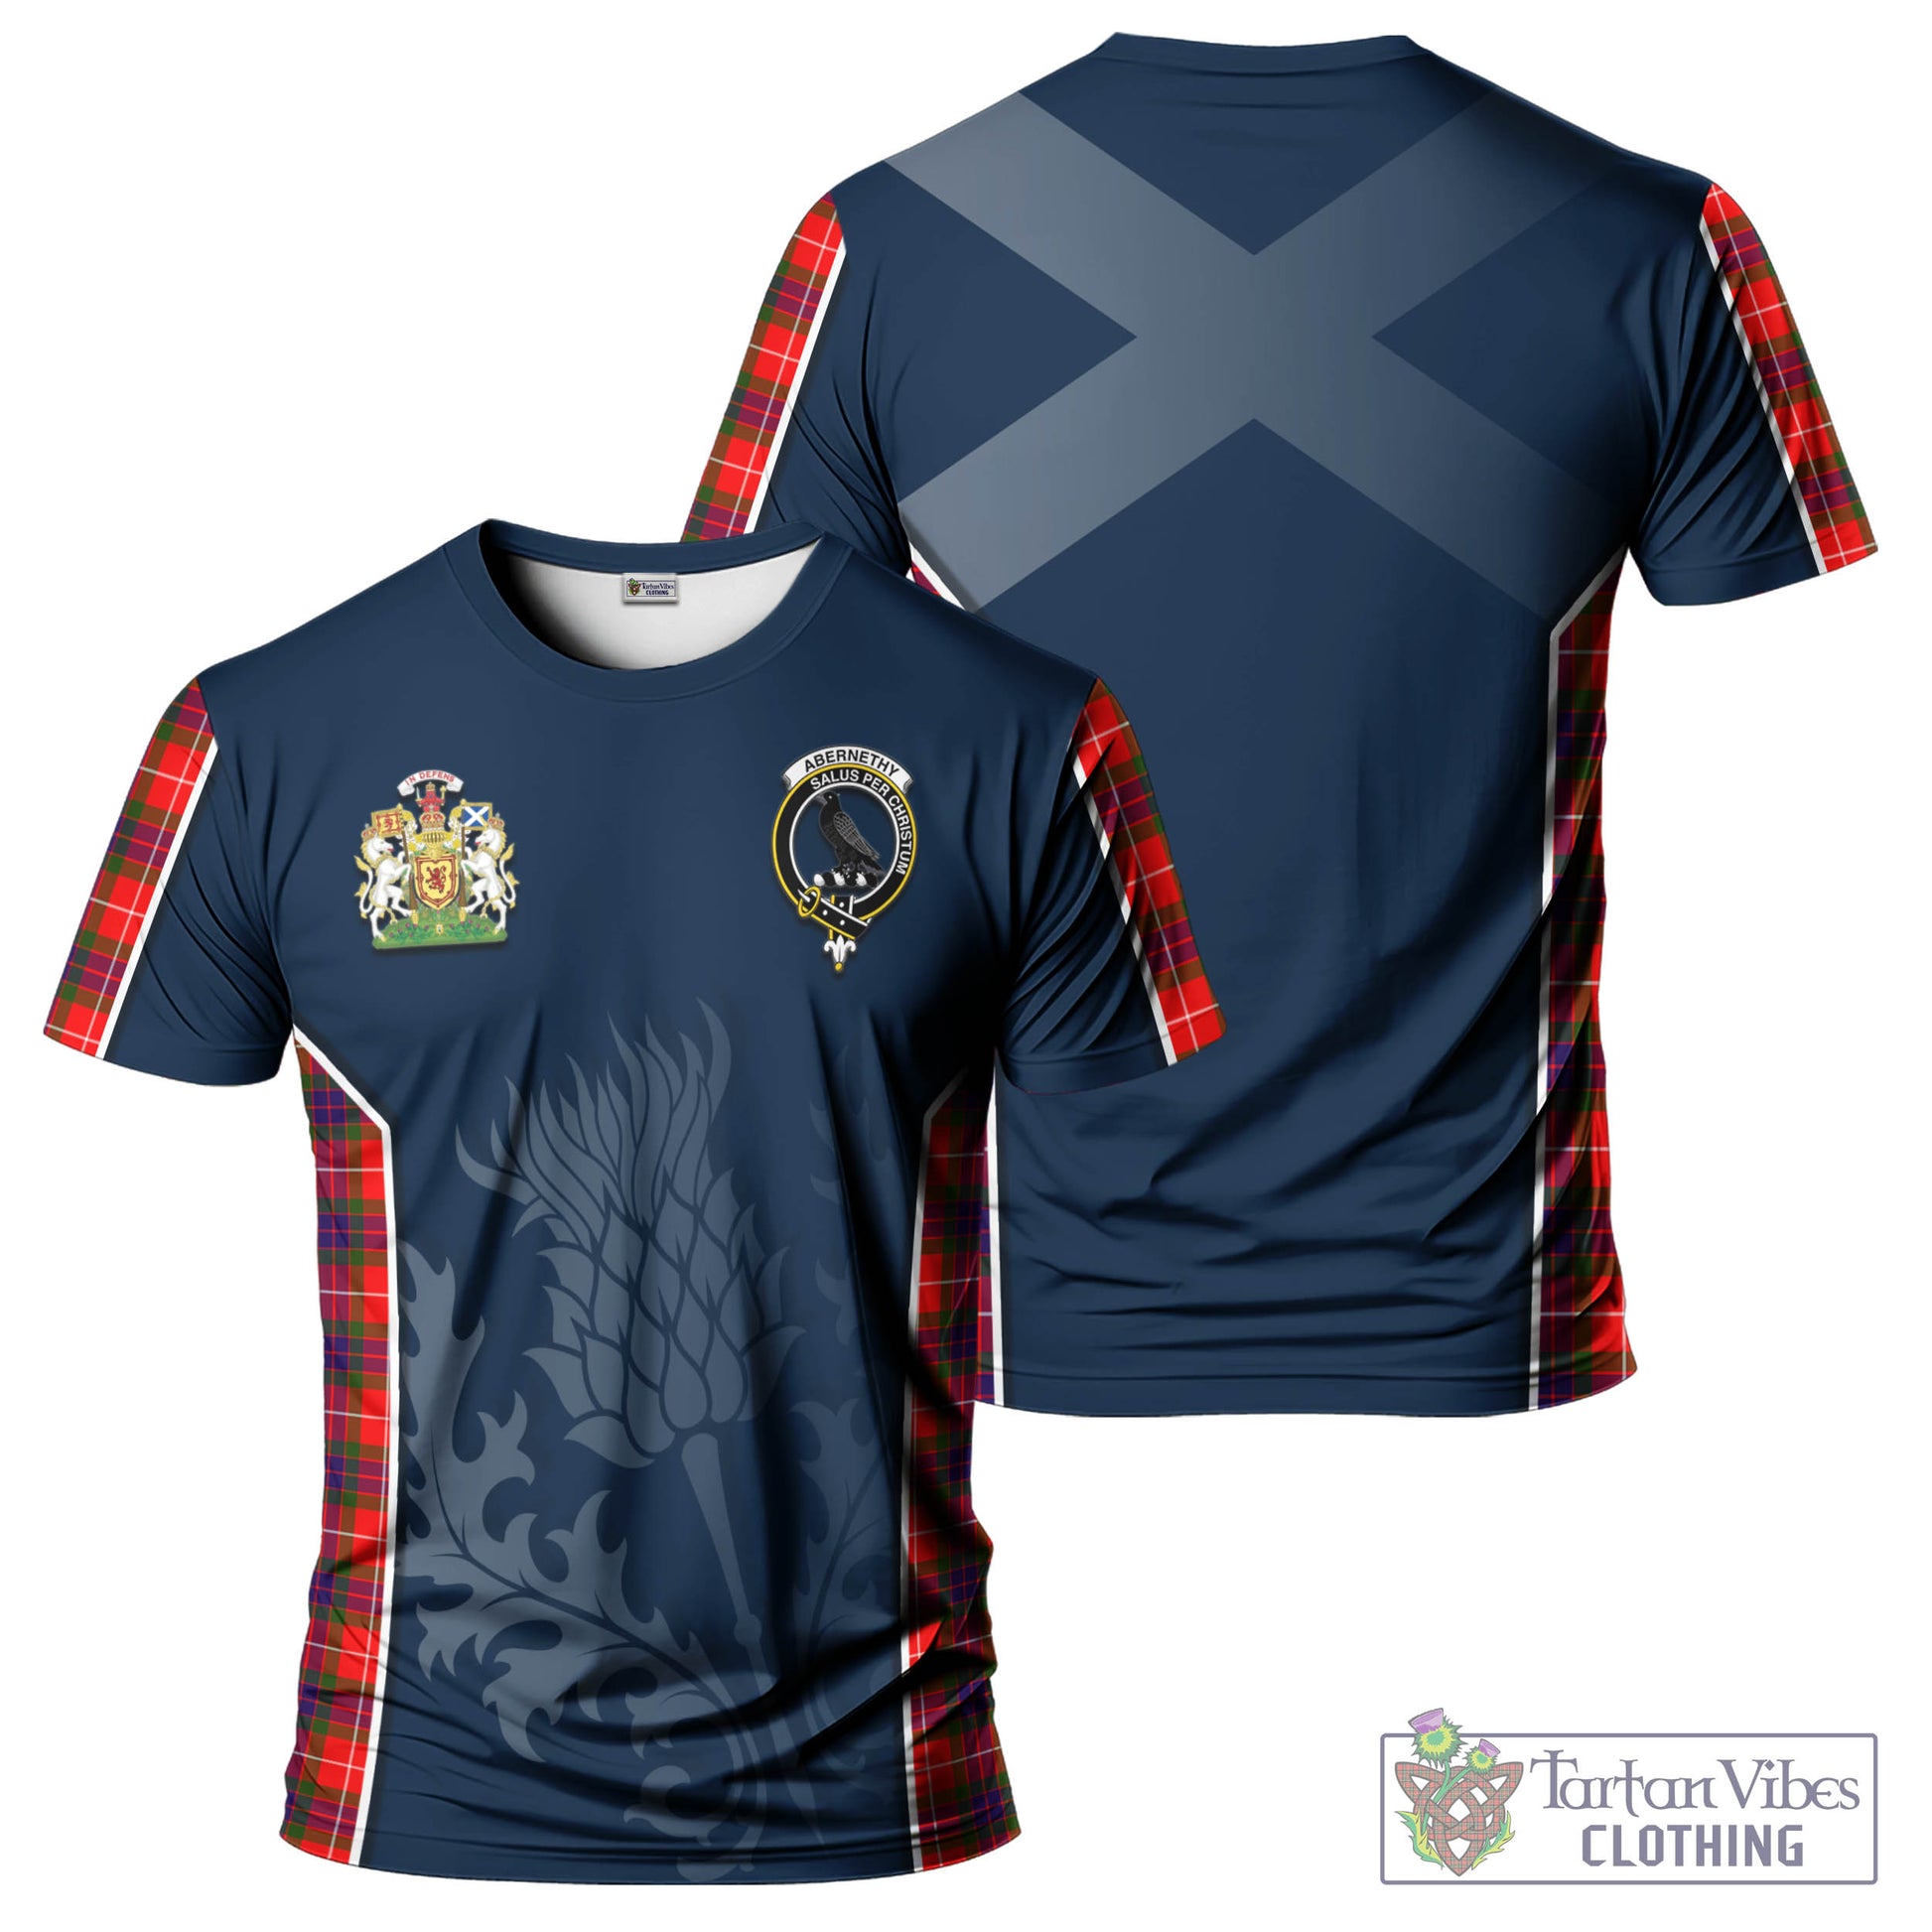 Tartan Vibes Clothing Abernethy Tartan T-Shirt with Family Crest and Scottish Thistle Vibes Sport Style